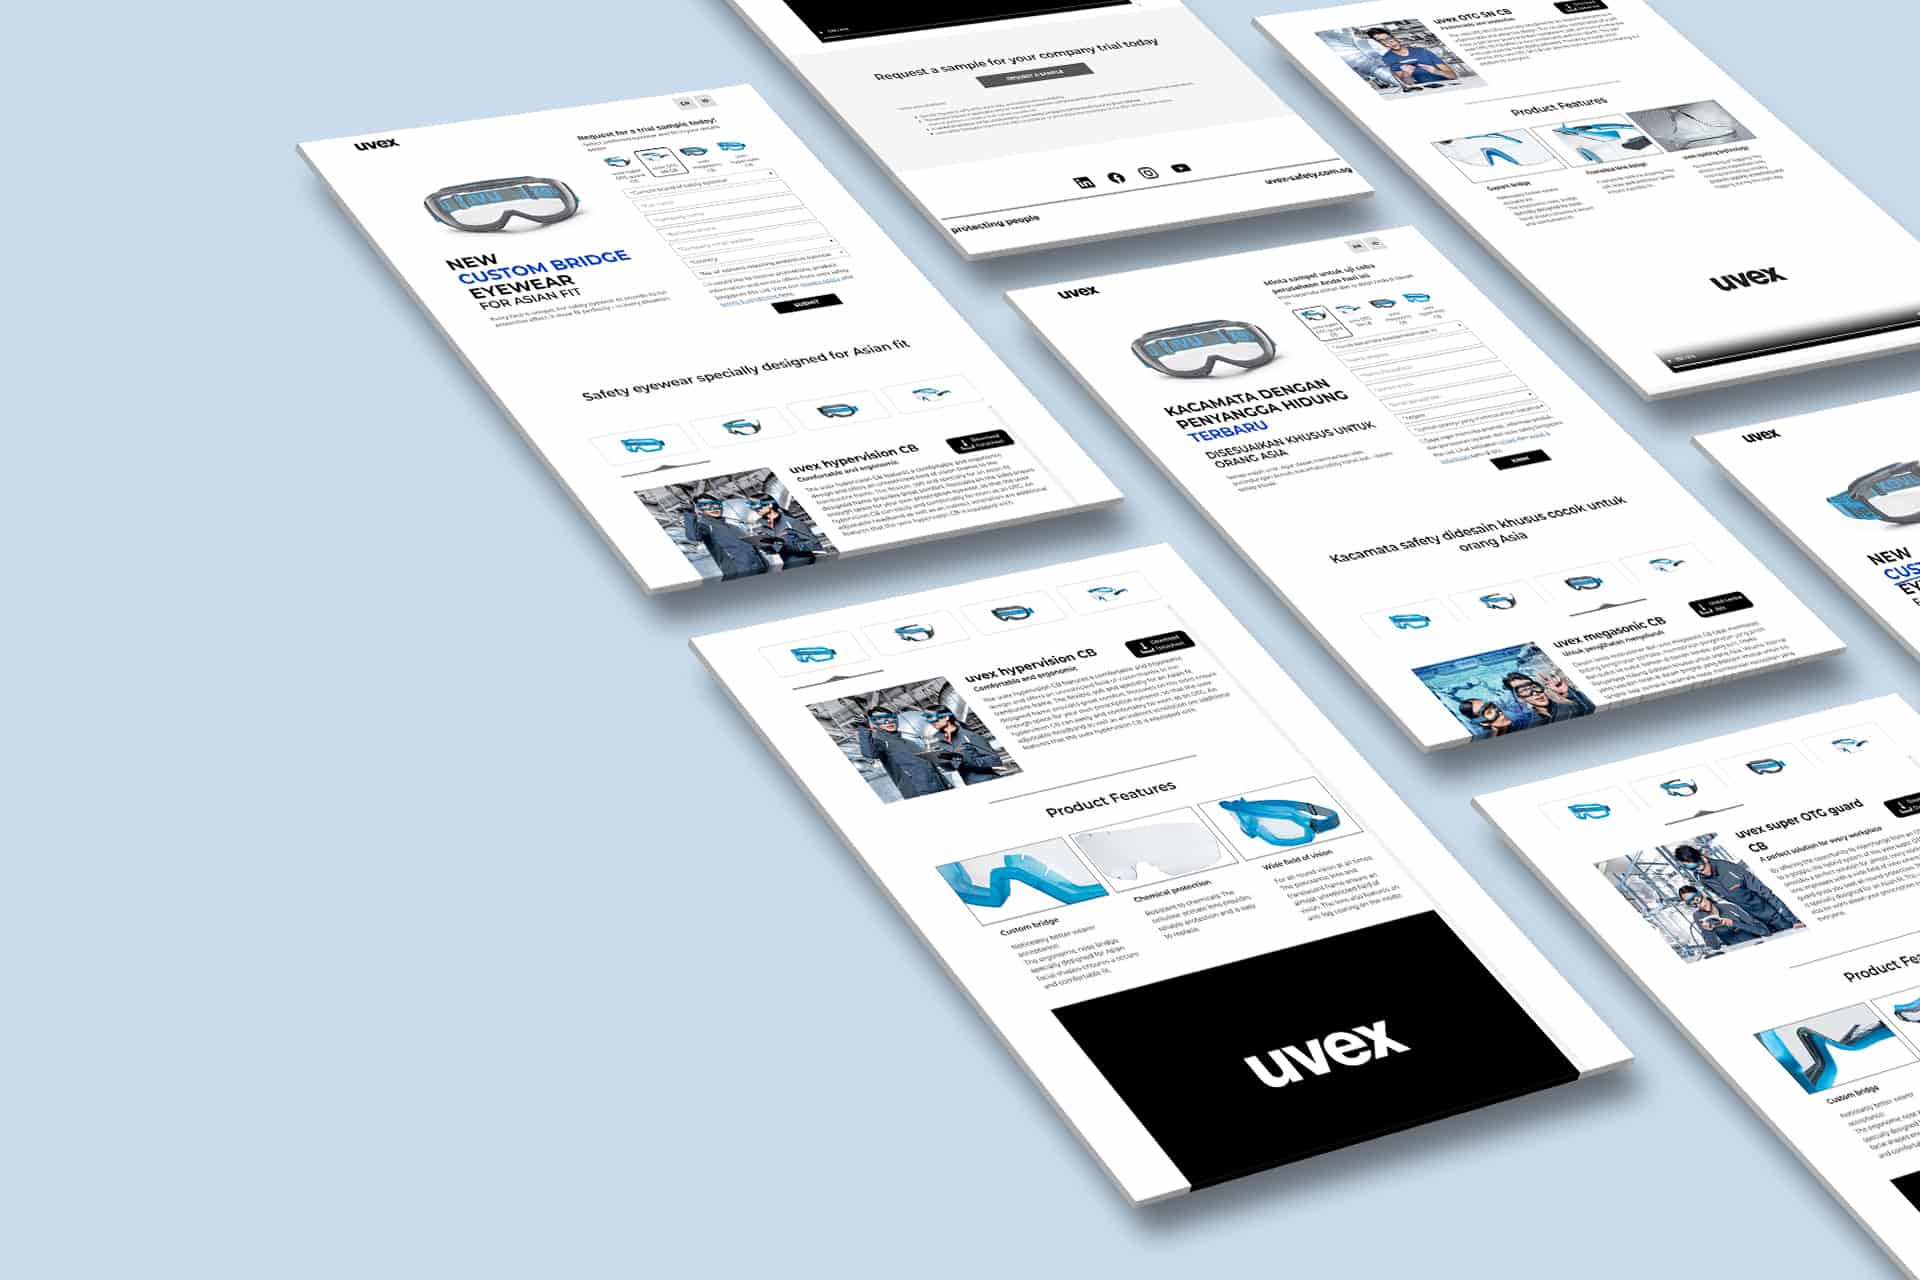 A set of web pages for a business, created using WordPress for efficient web development and with a focus on landing page creation.